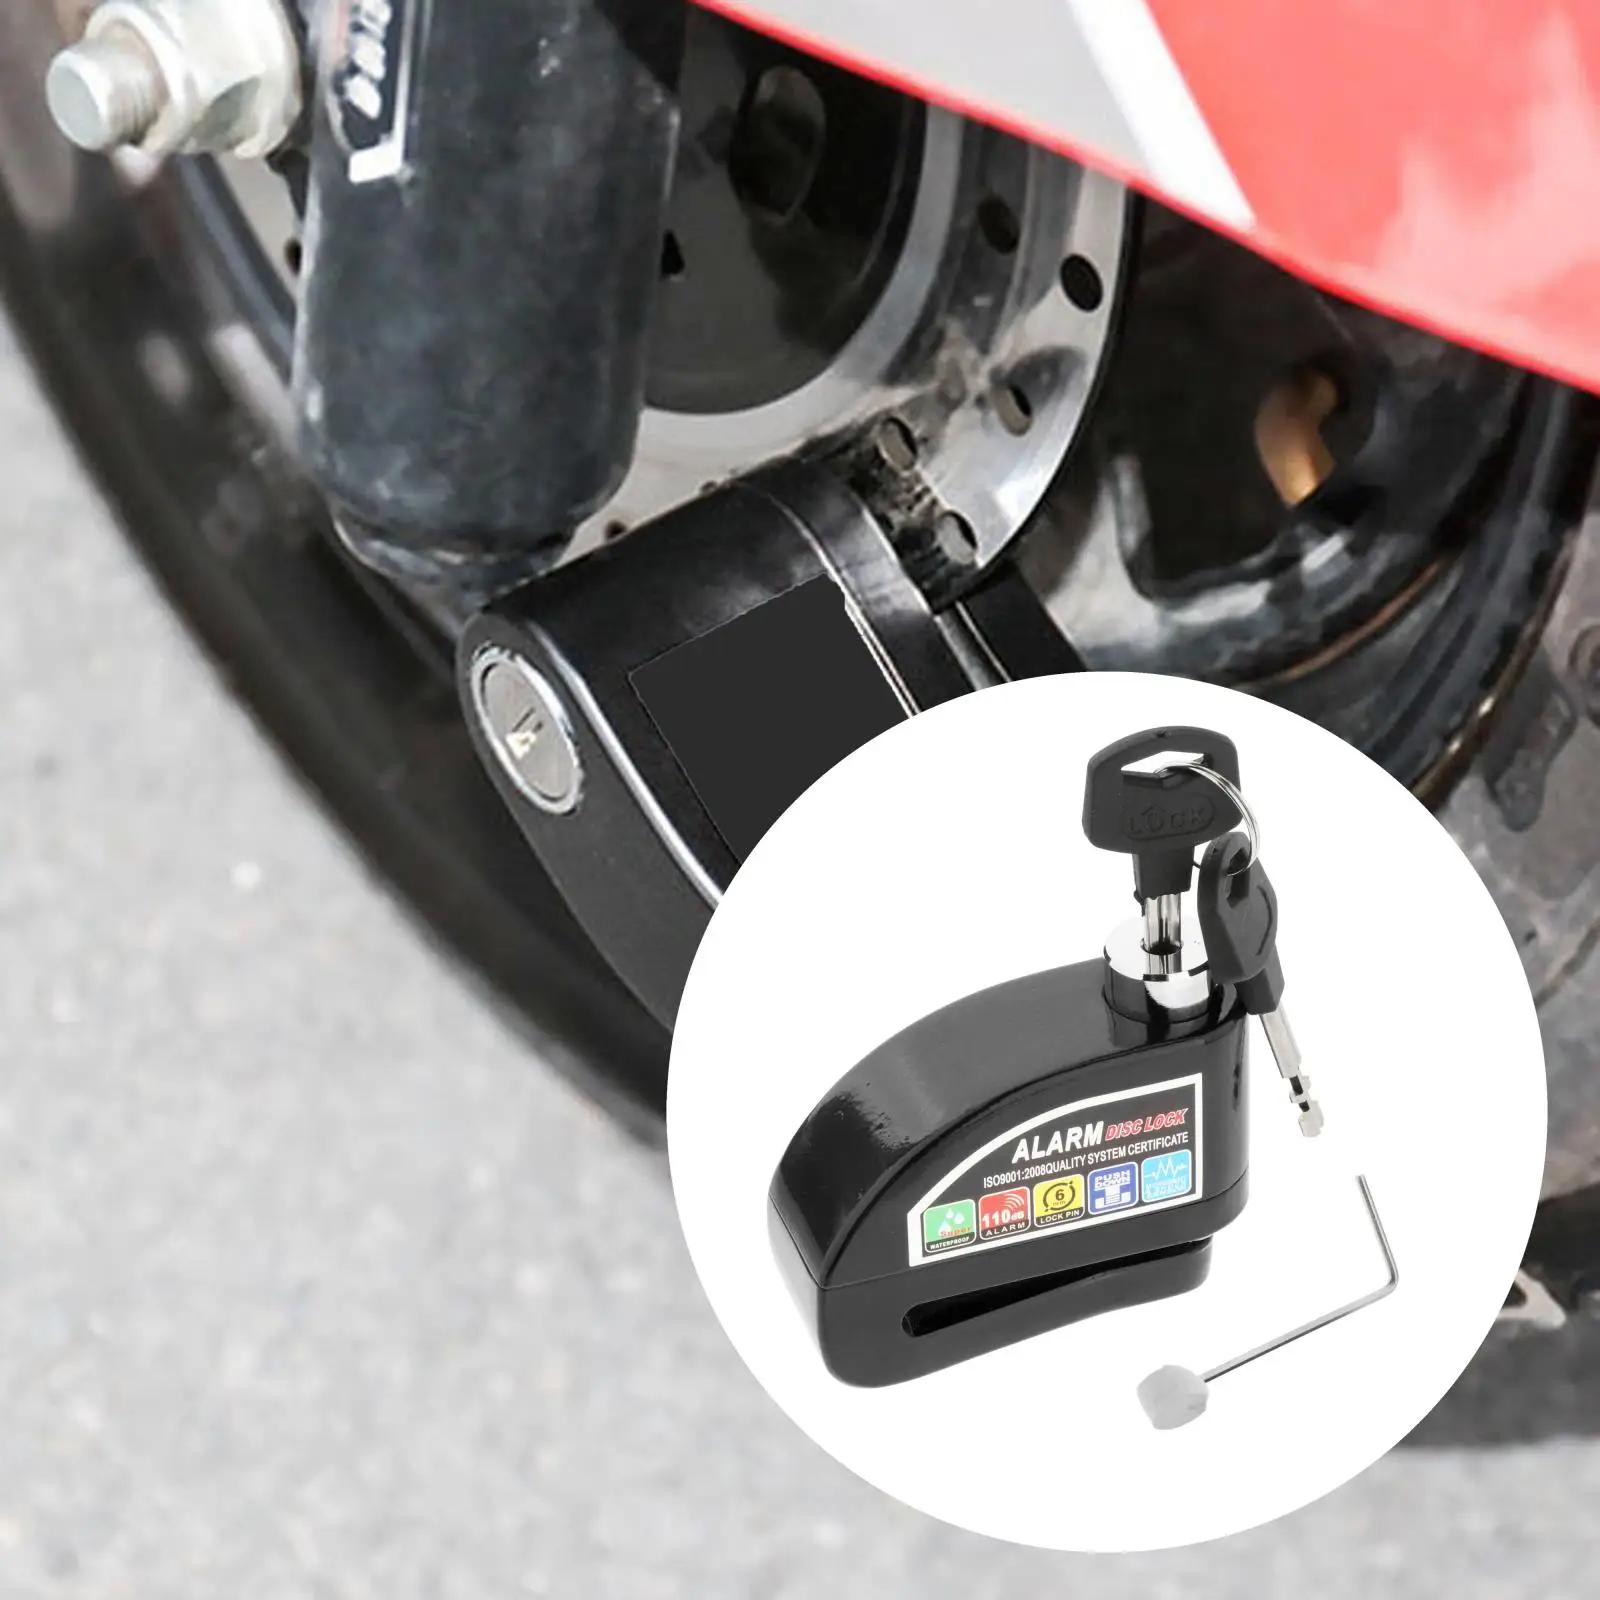 Motorcycle Disc Lock Heavy Duty with Alarm 110dB 6mm Pin Disc Brake Lock for MTB Scooter Bike Theft Prevention